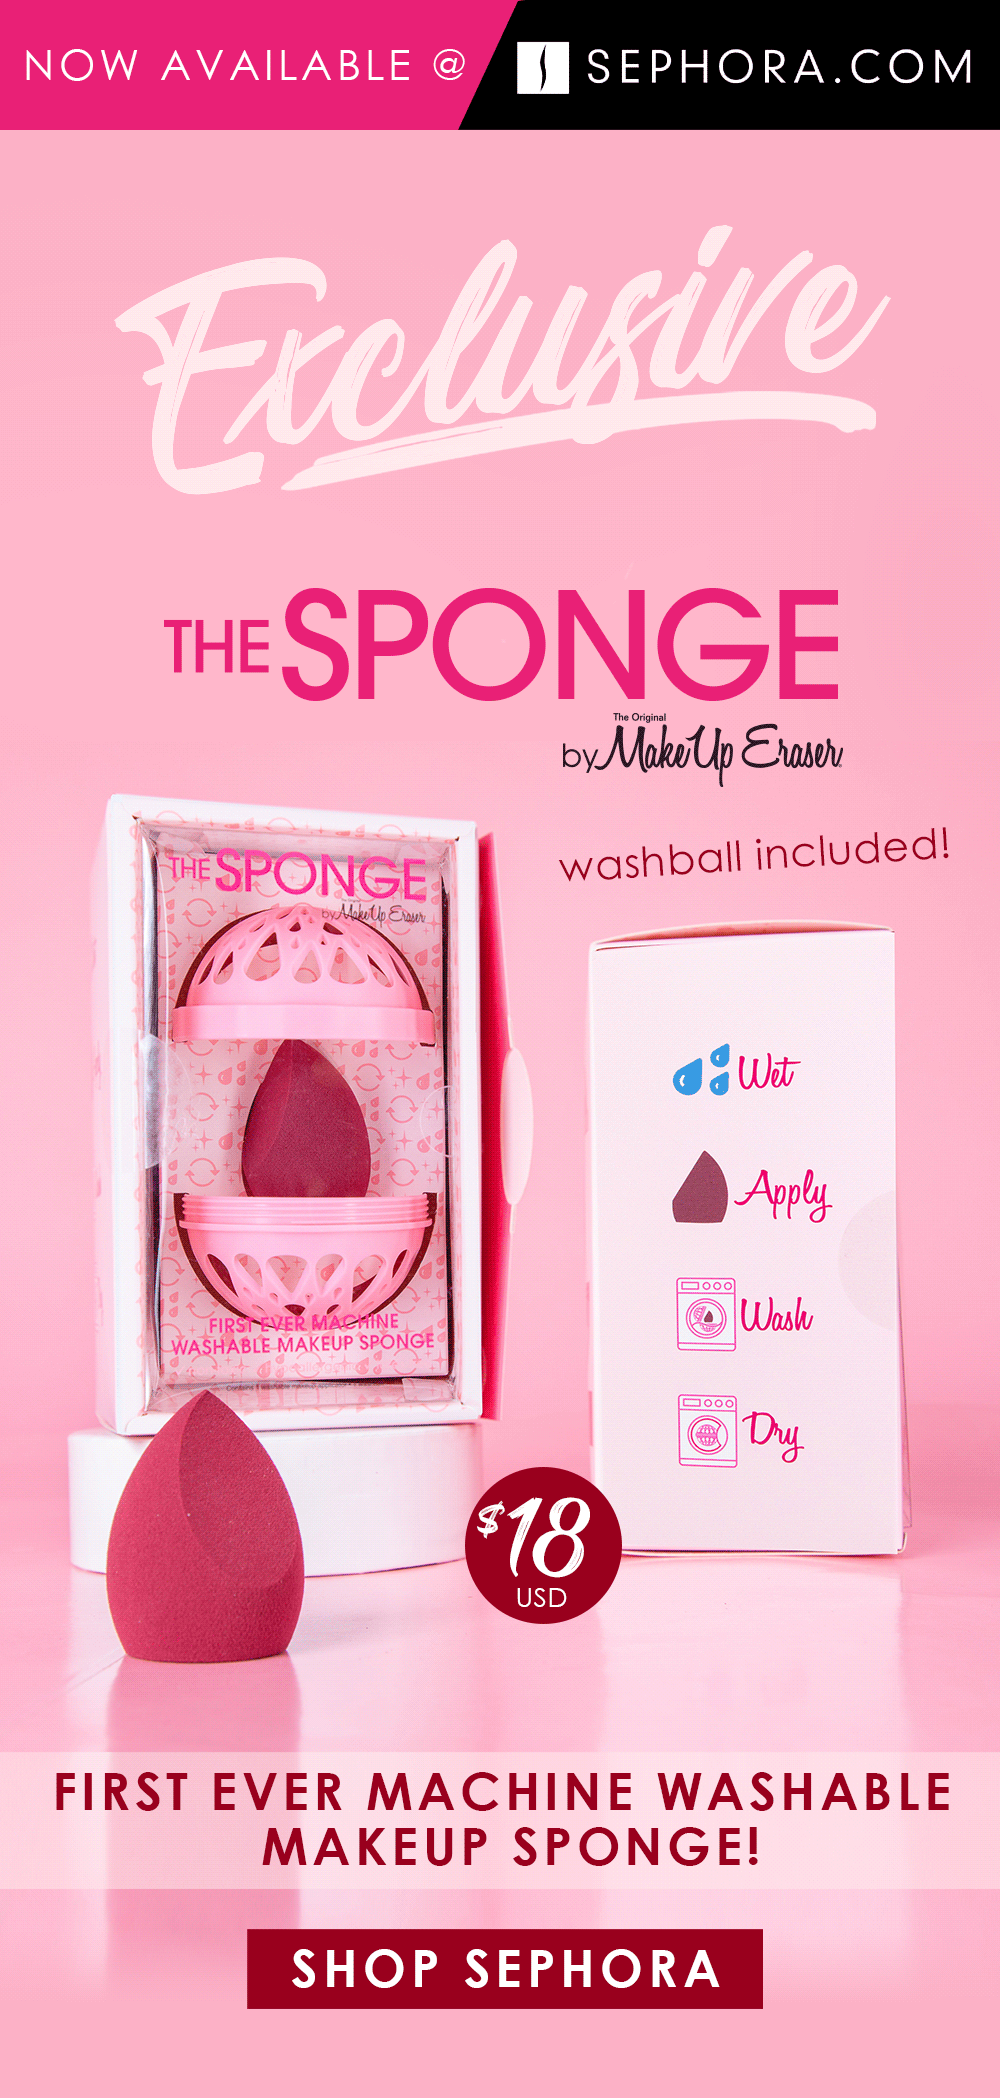 THE SPONGE is officially online @ SEPHORA